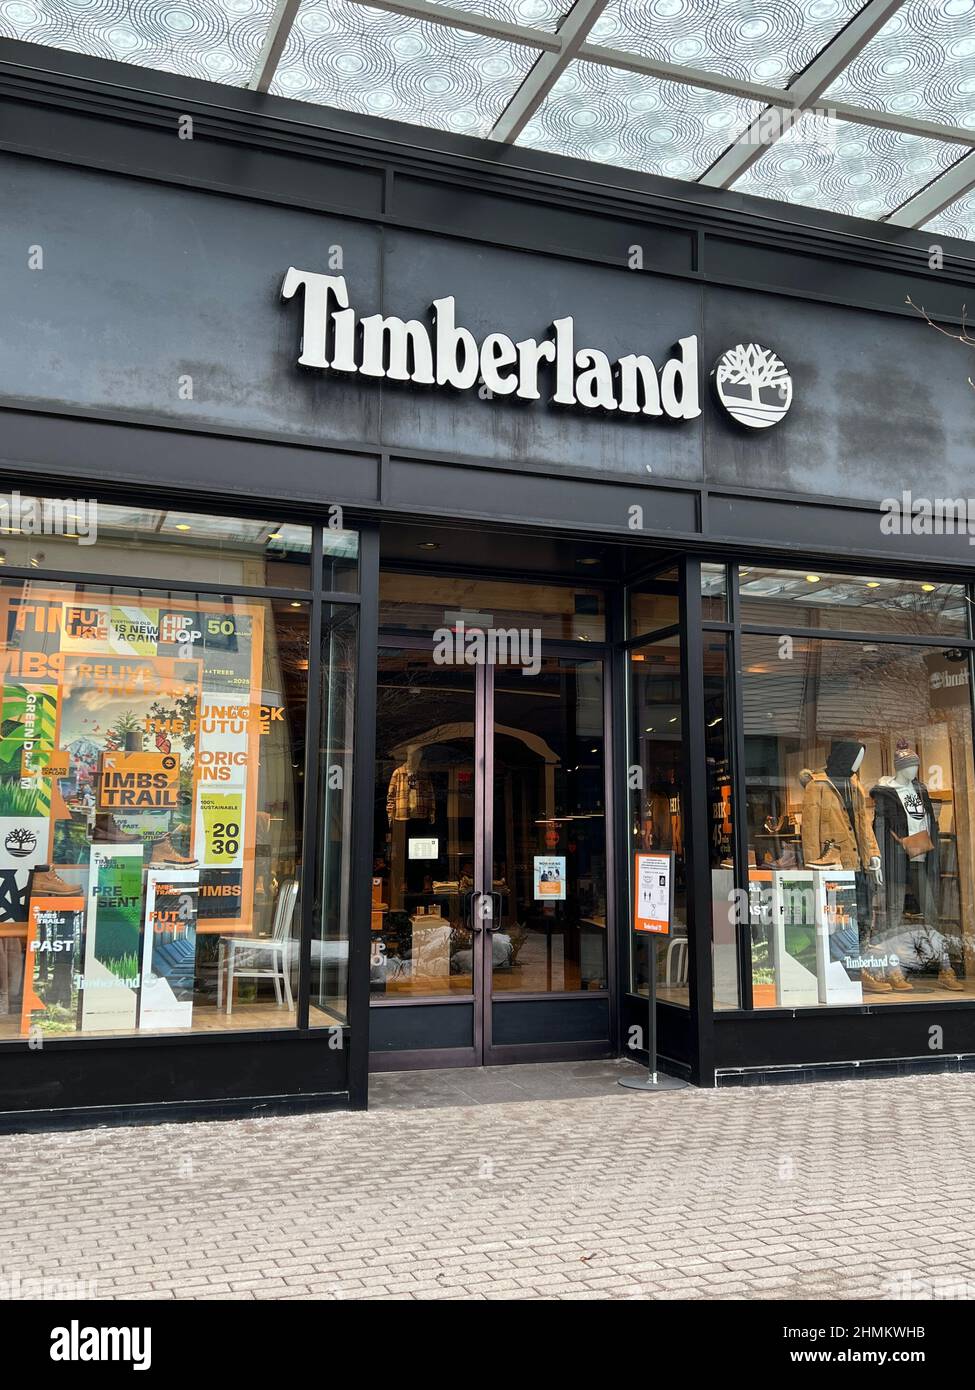 Timberland Store High Resolution Stock Photography and Images - Alamy